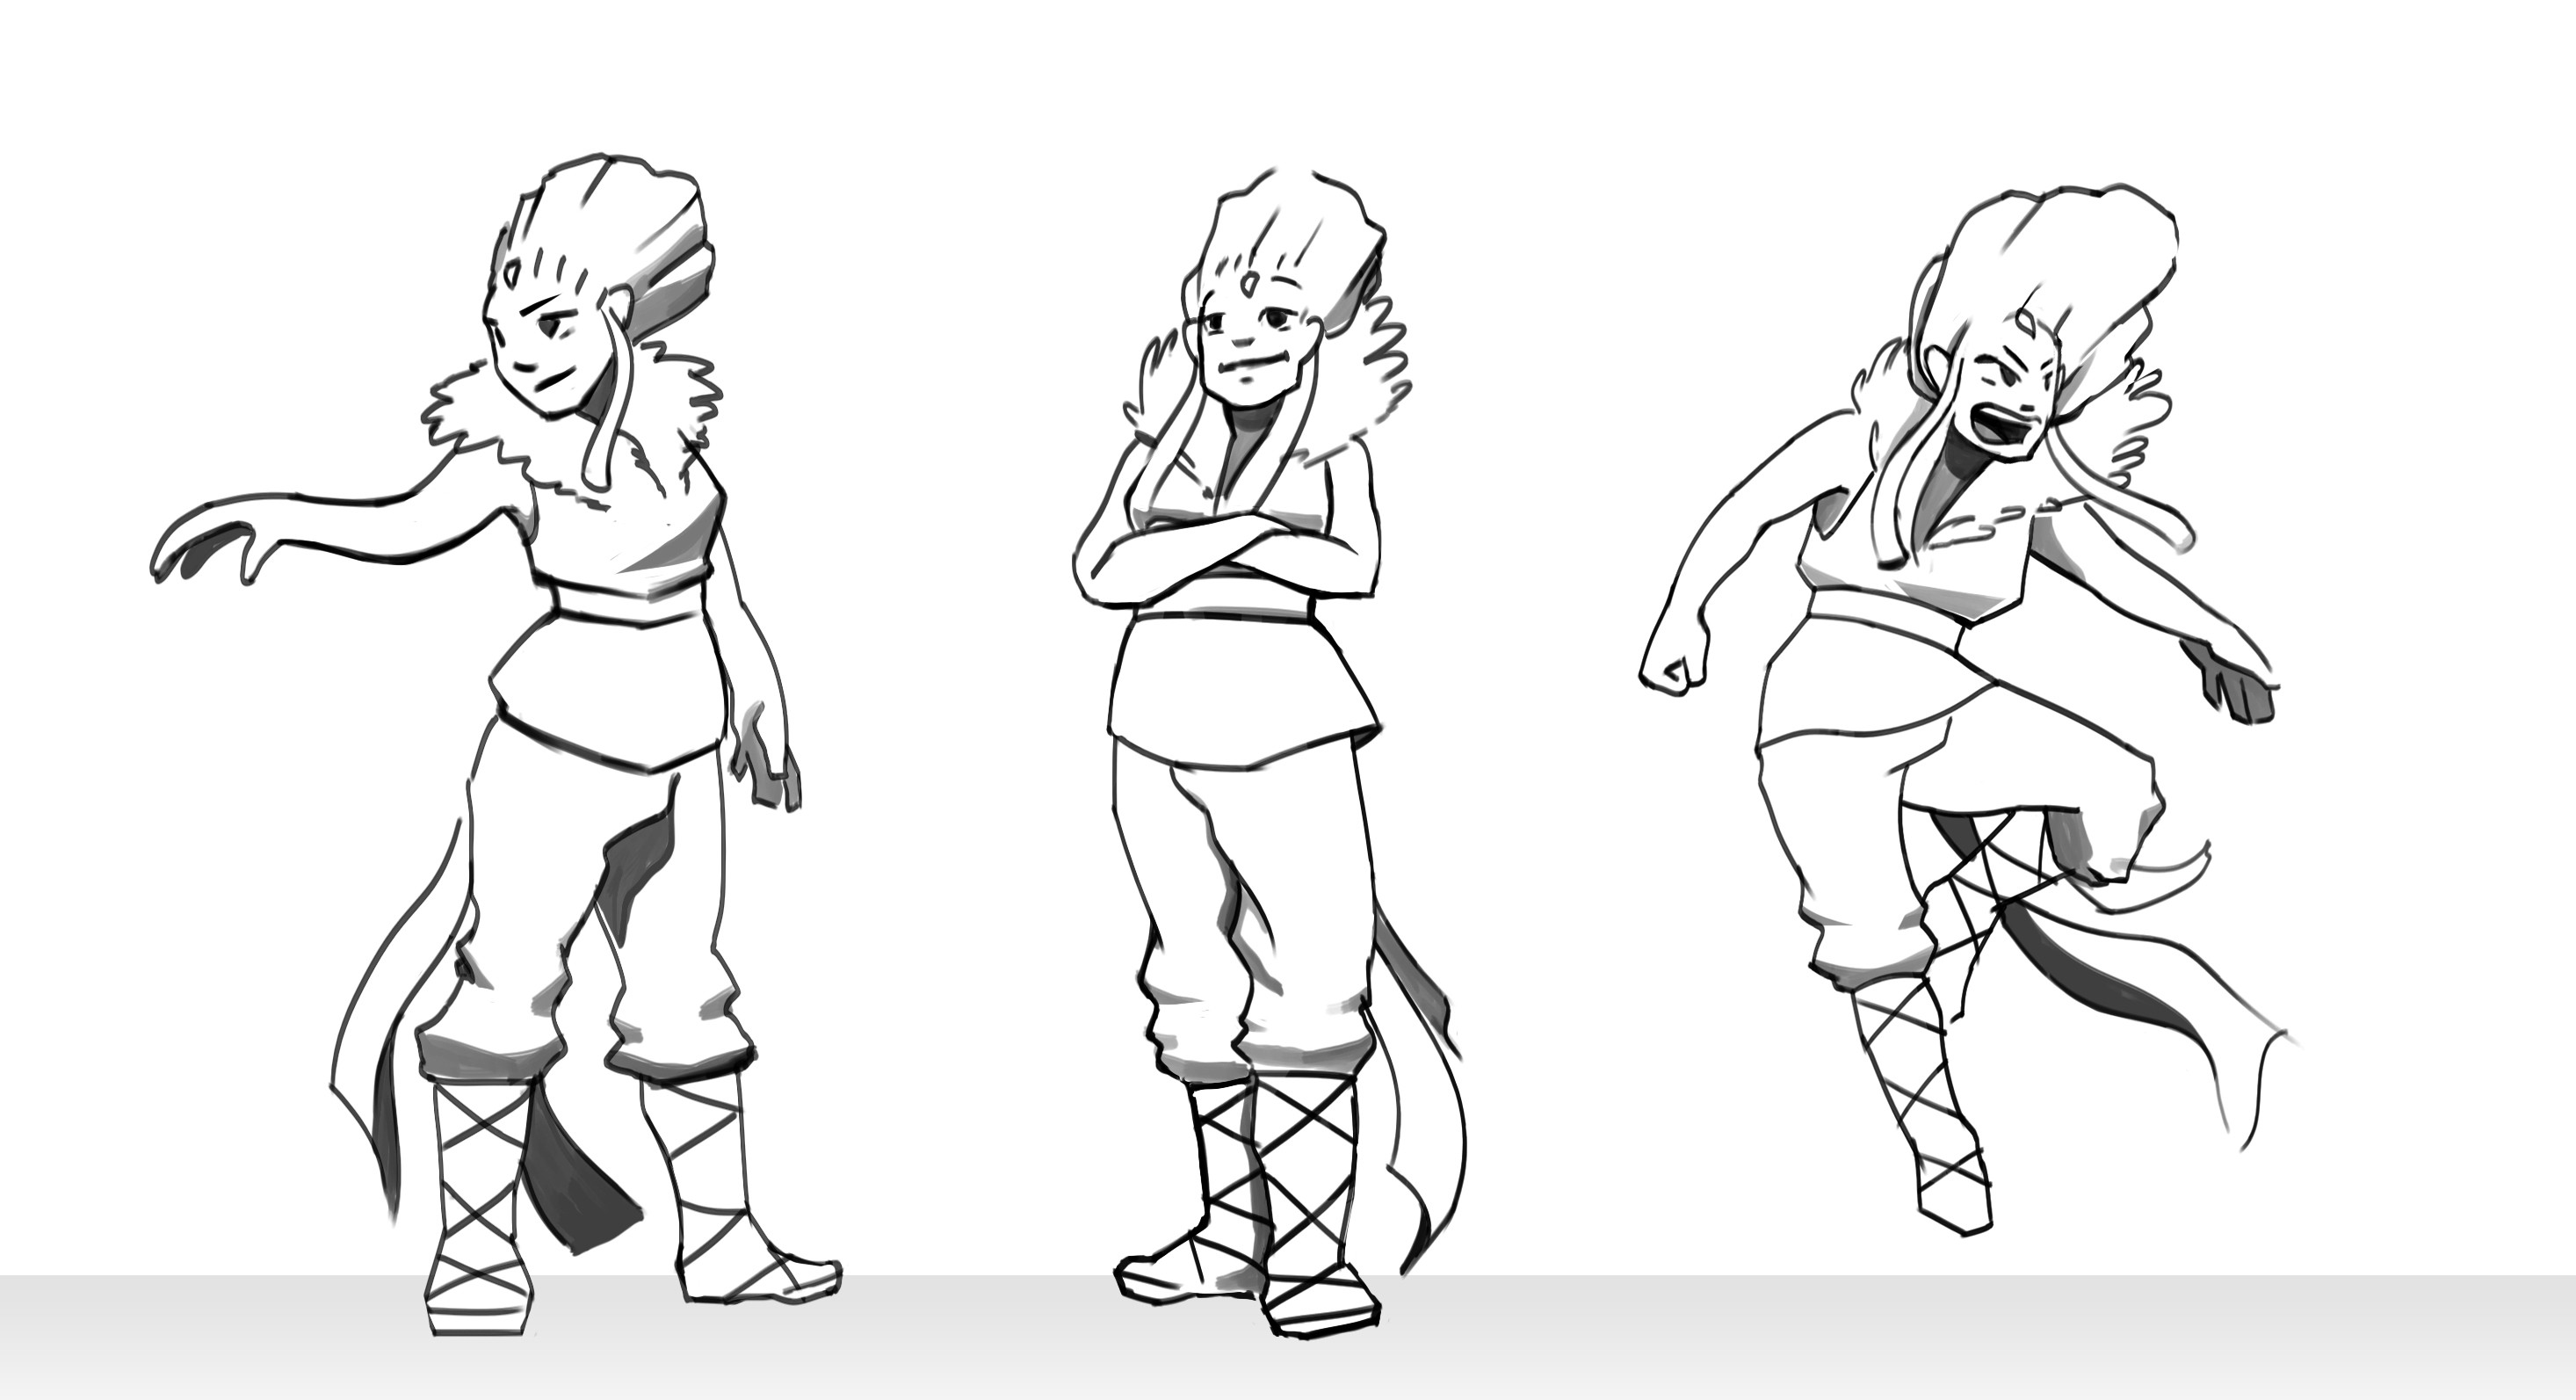 Retake of the main character that I have designed for the game Afterward, in a cartoon style. Working on the attitudes/poses.